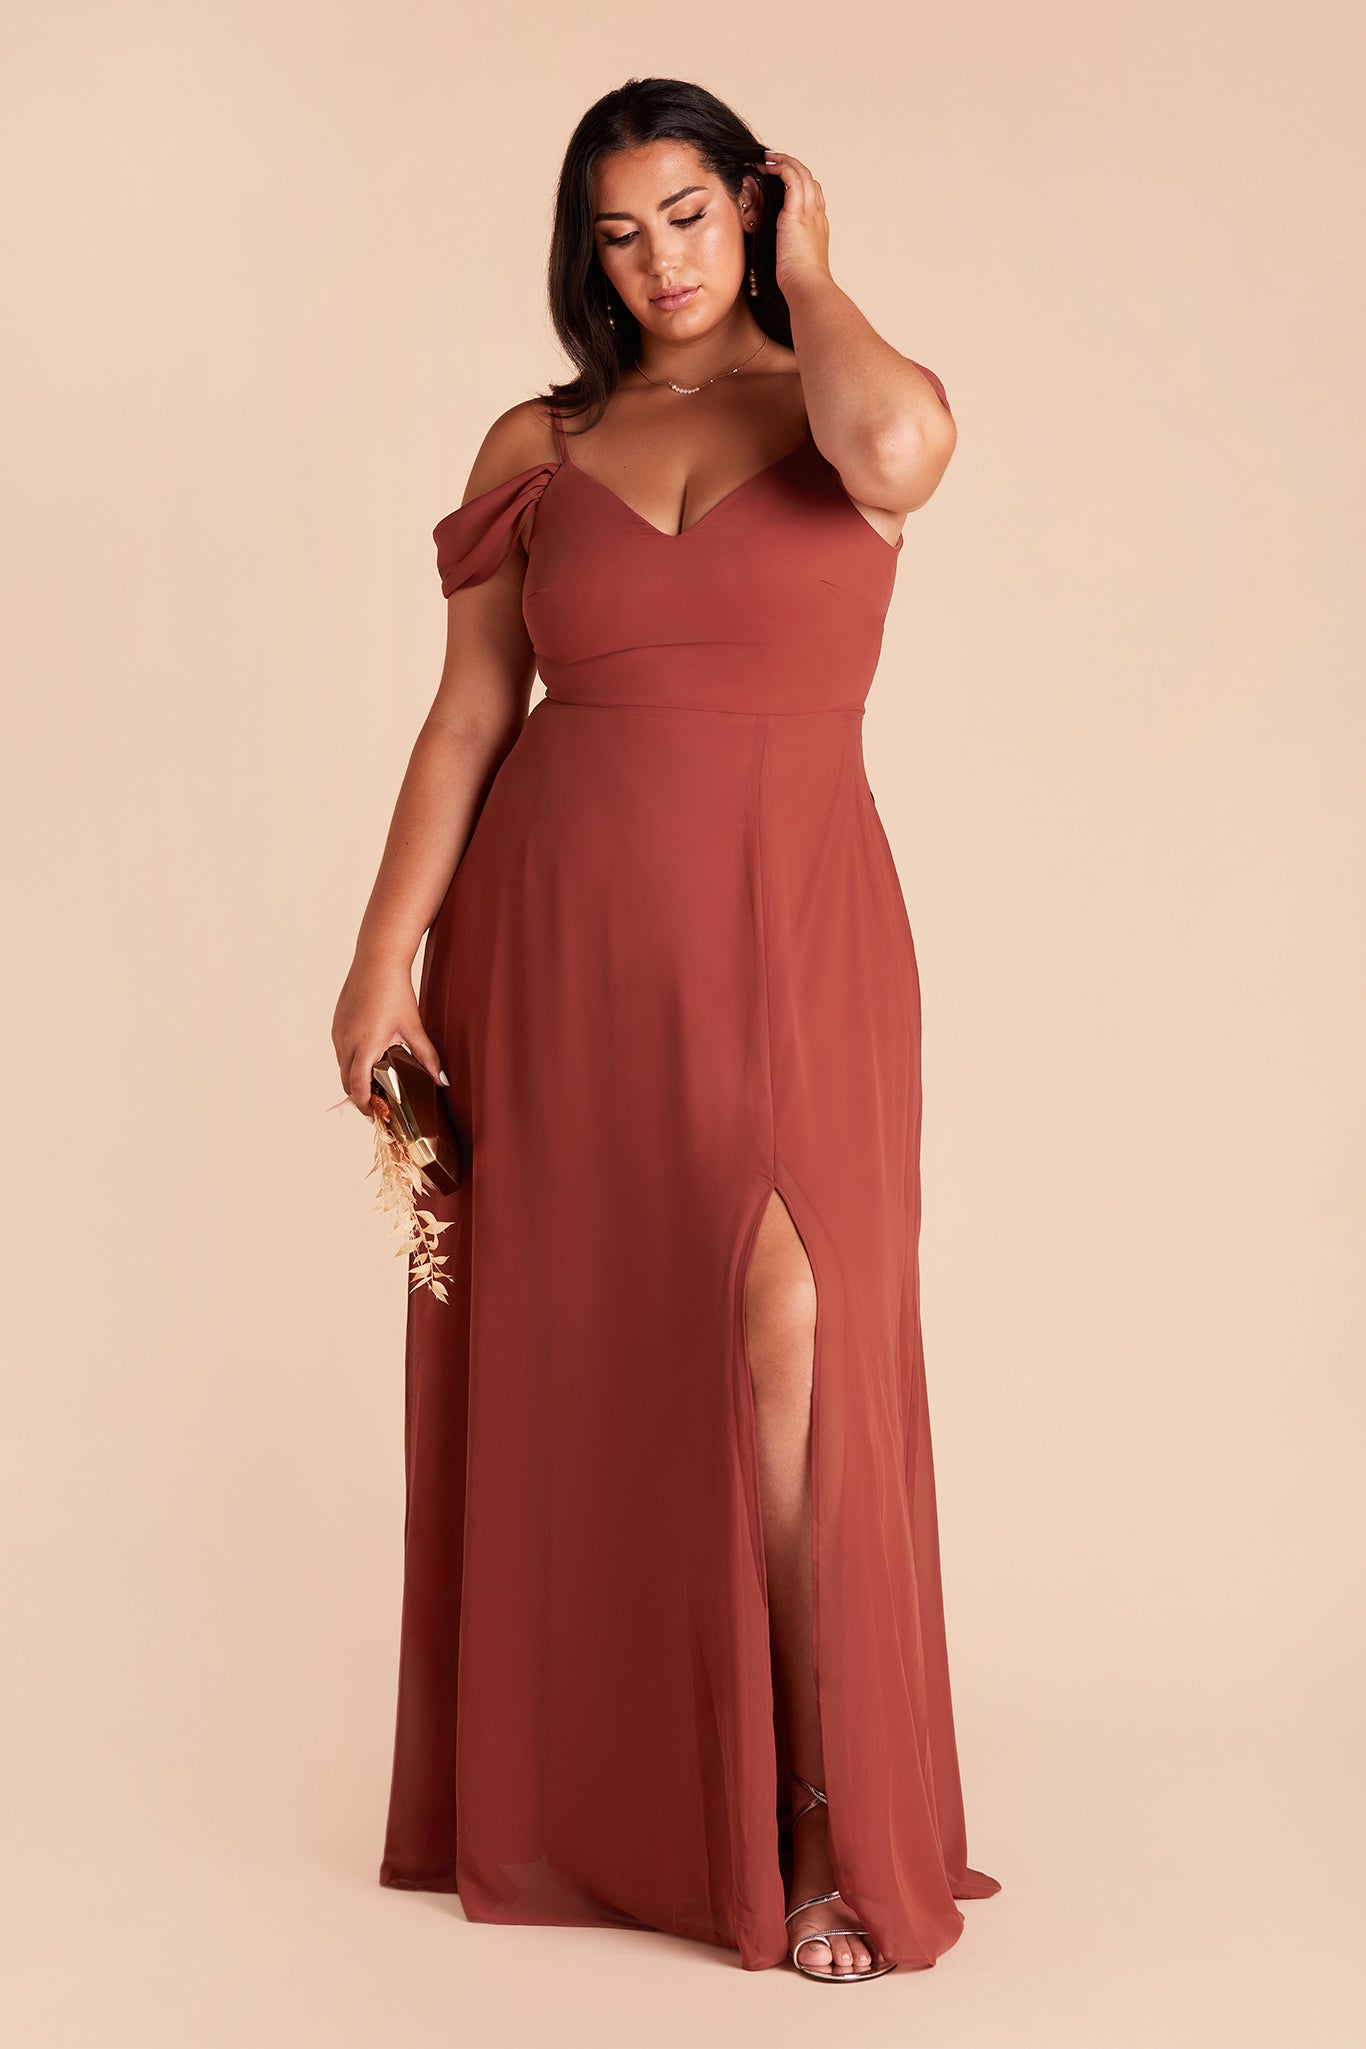 Devin convertible plus size bridesmaids dress with slit in spice chiffon by Birdy Grey, front view